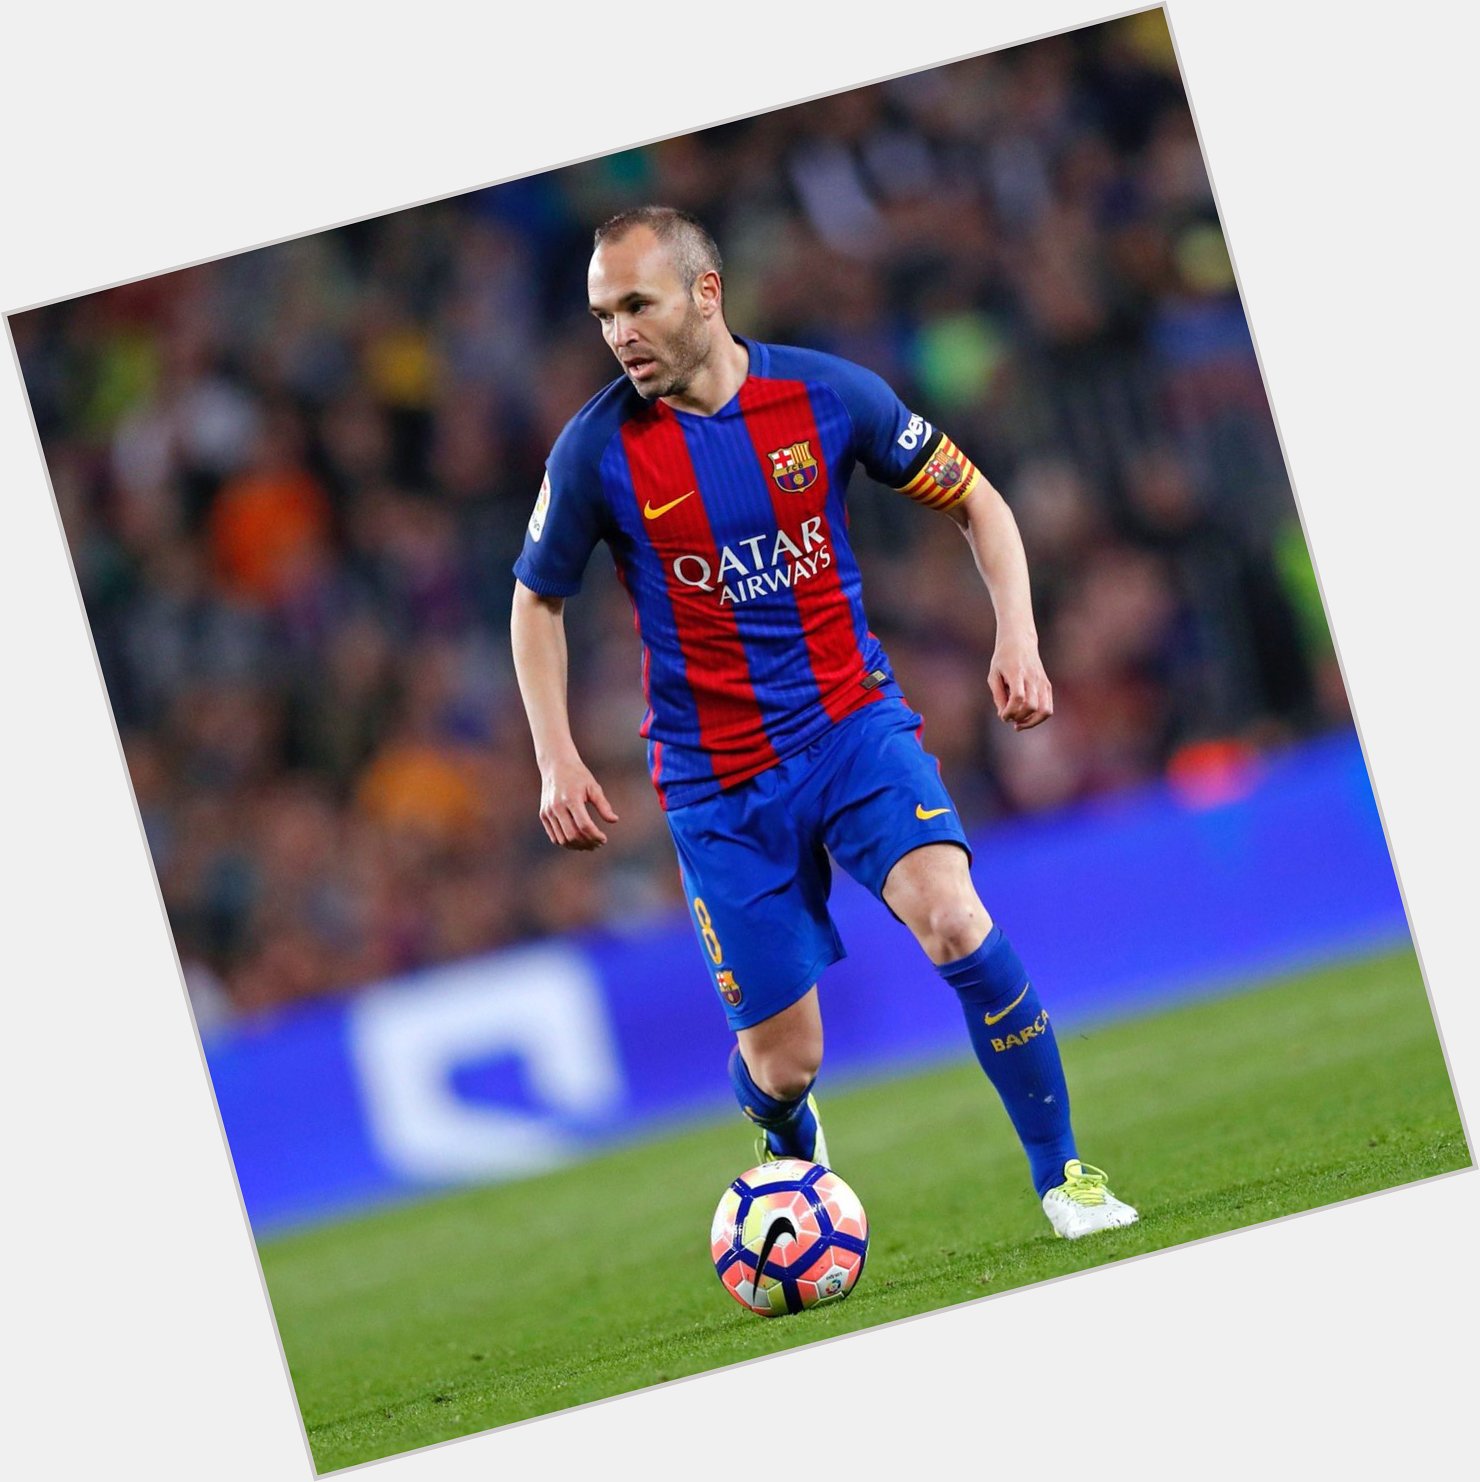 Happy birthday to a real one, Don Andres Iniesta , un ídolo    